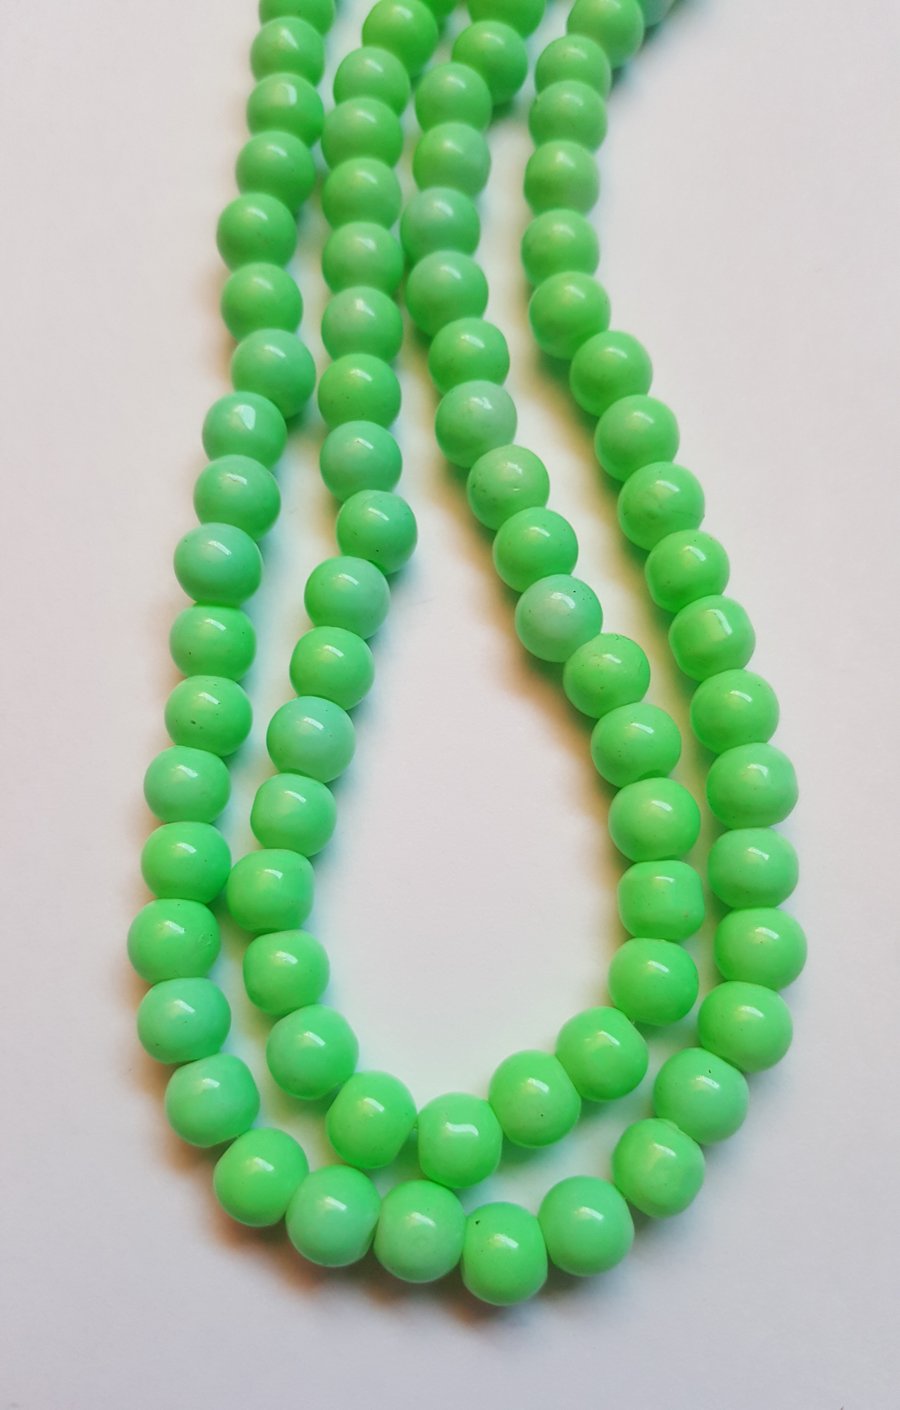 50 x Baked Glass Beads - Round - 6mm - Green 